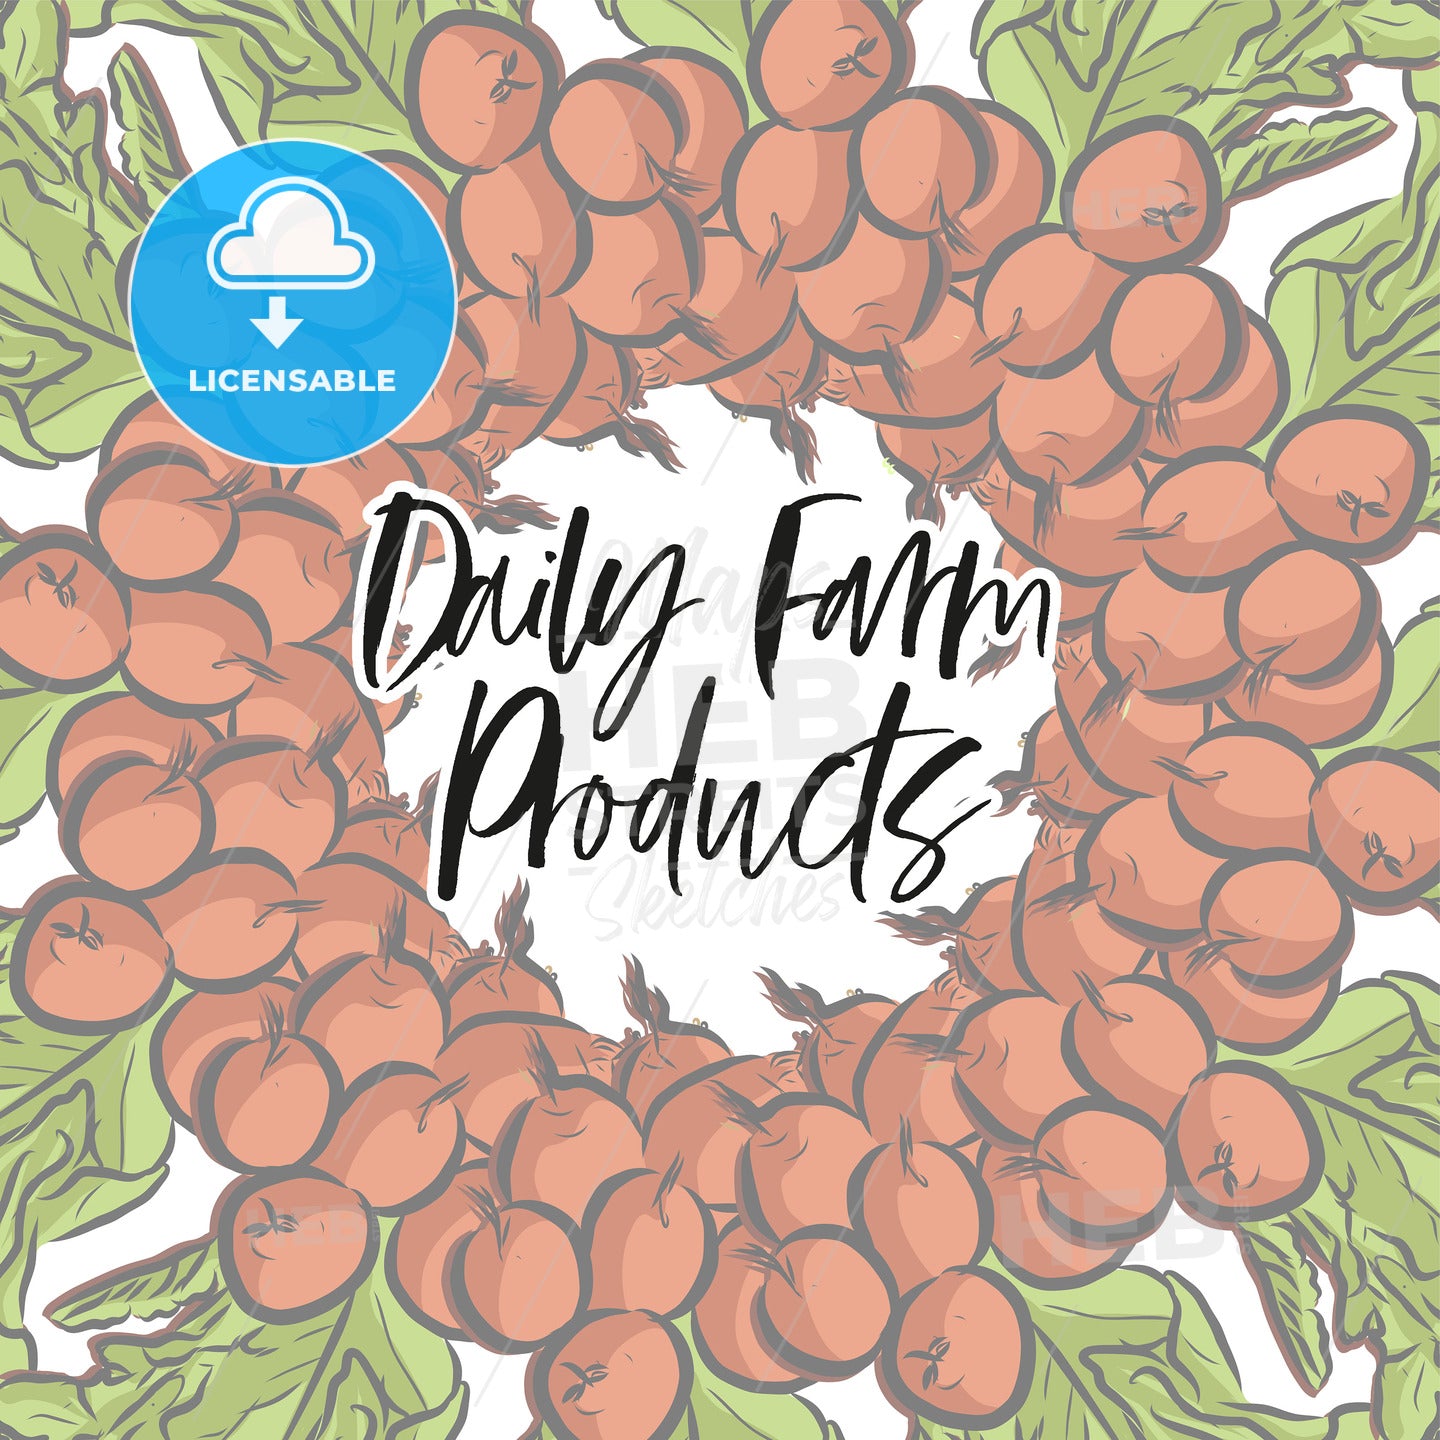 Daily Farm Products lettering and Radishes arranged in a circle – instant download